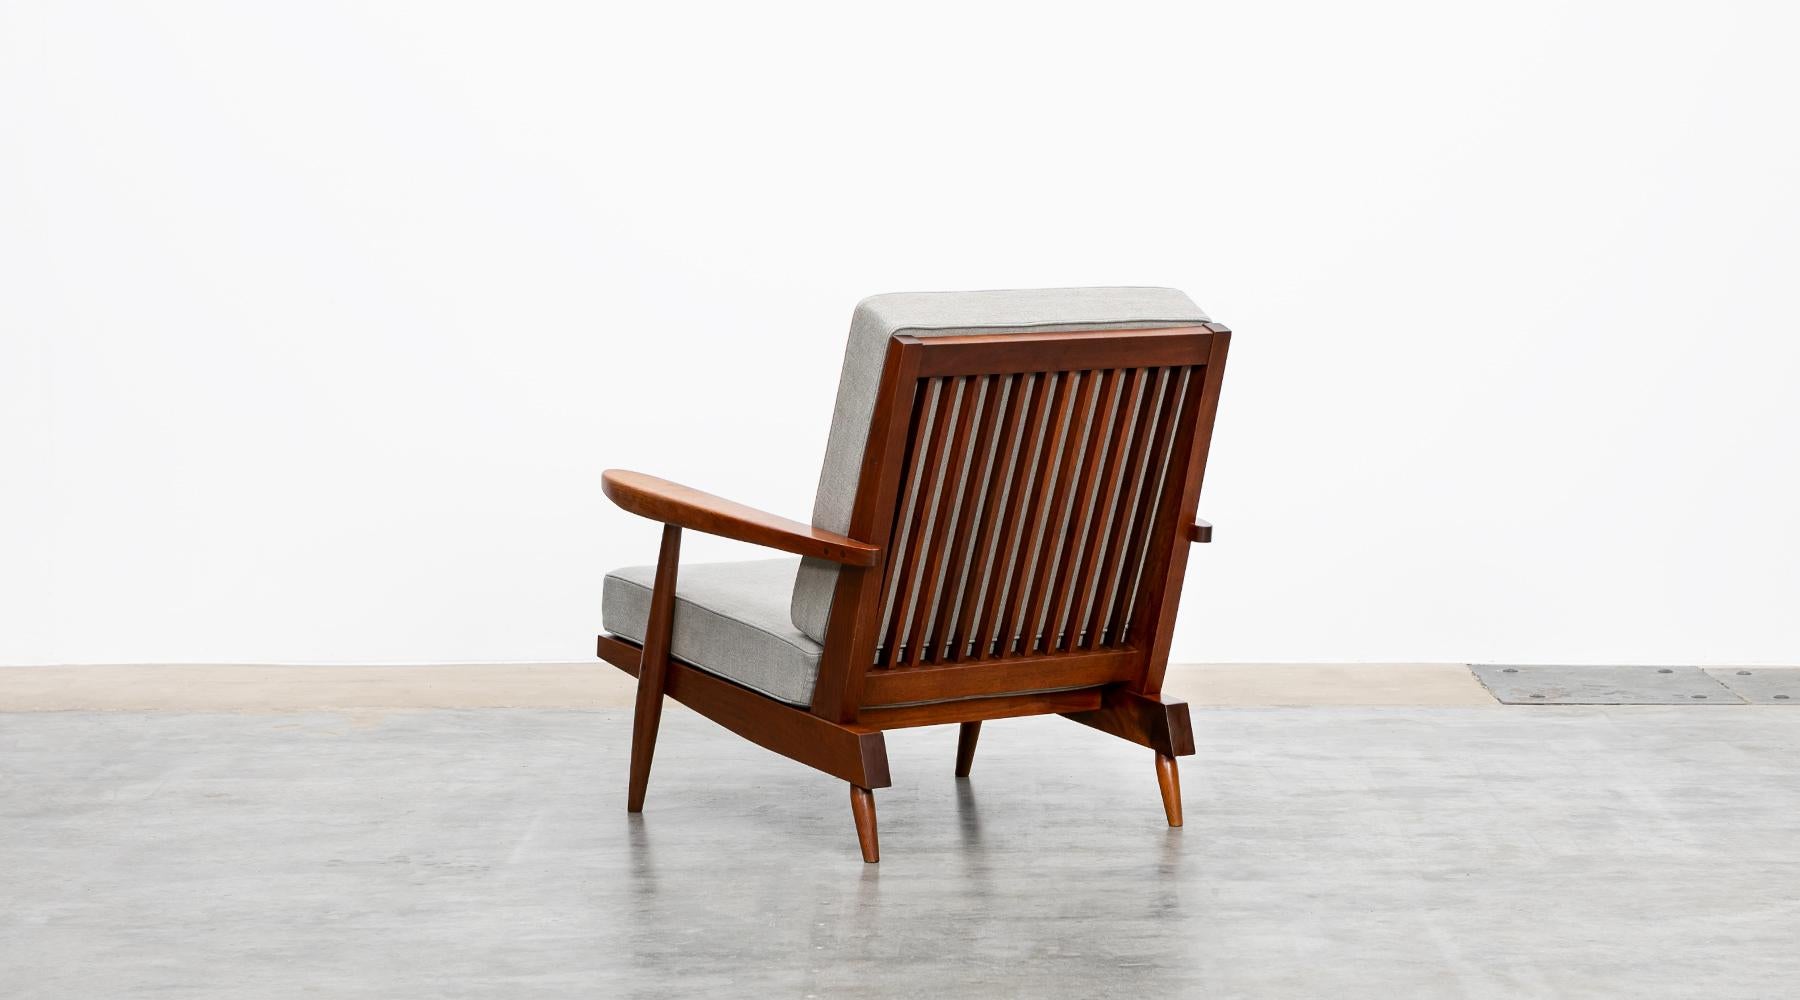 1960s Walnut, Grey Upholstery Armchair with Ottoman by George Nakashima For Sale 2